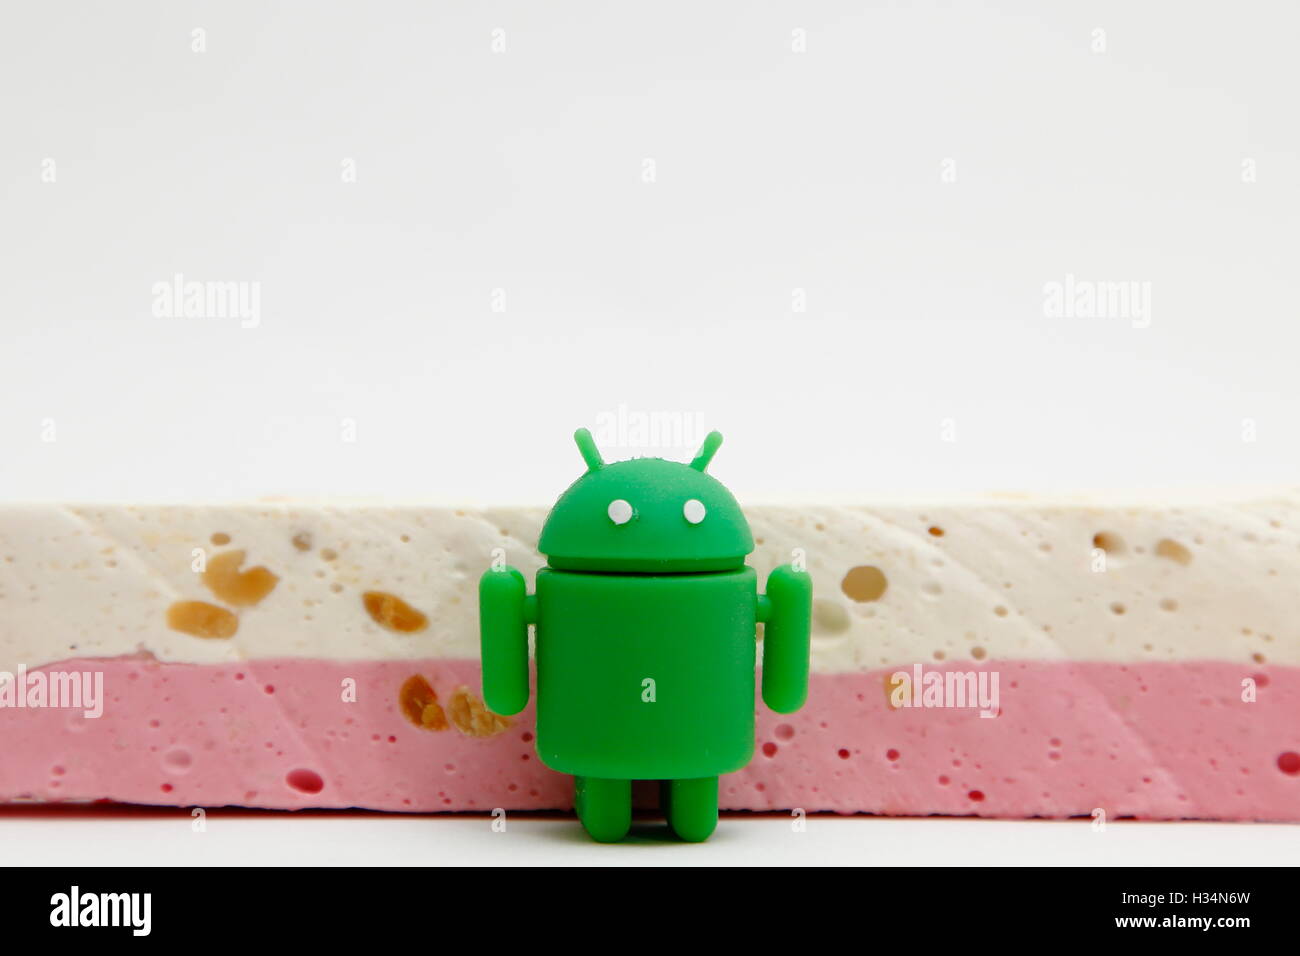 The Android robot loiters in front of a bar of nougat. Stock Photo